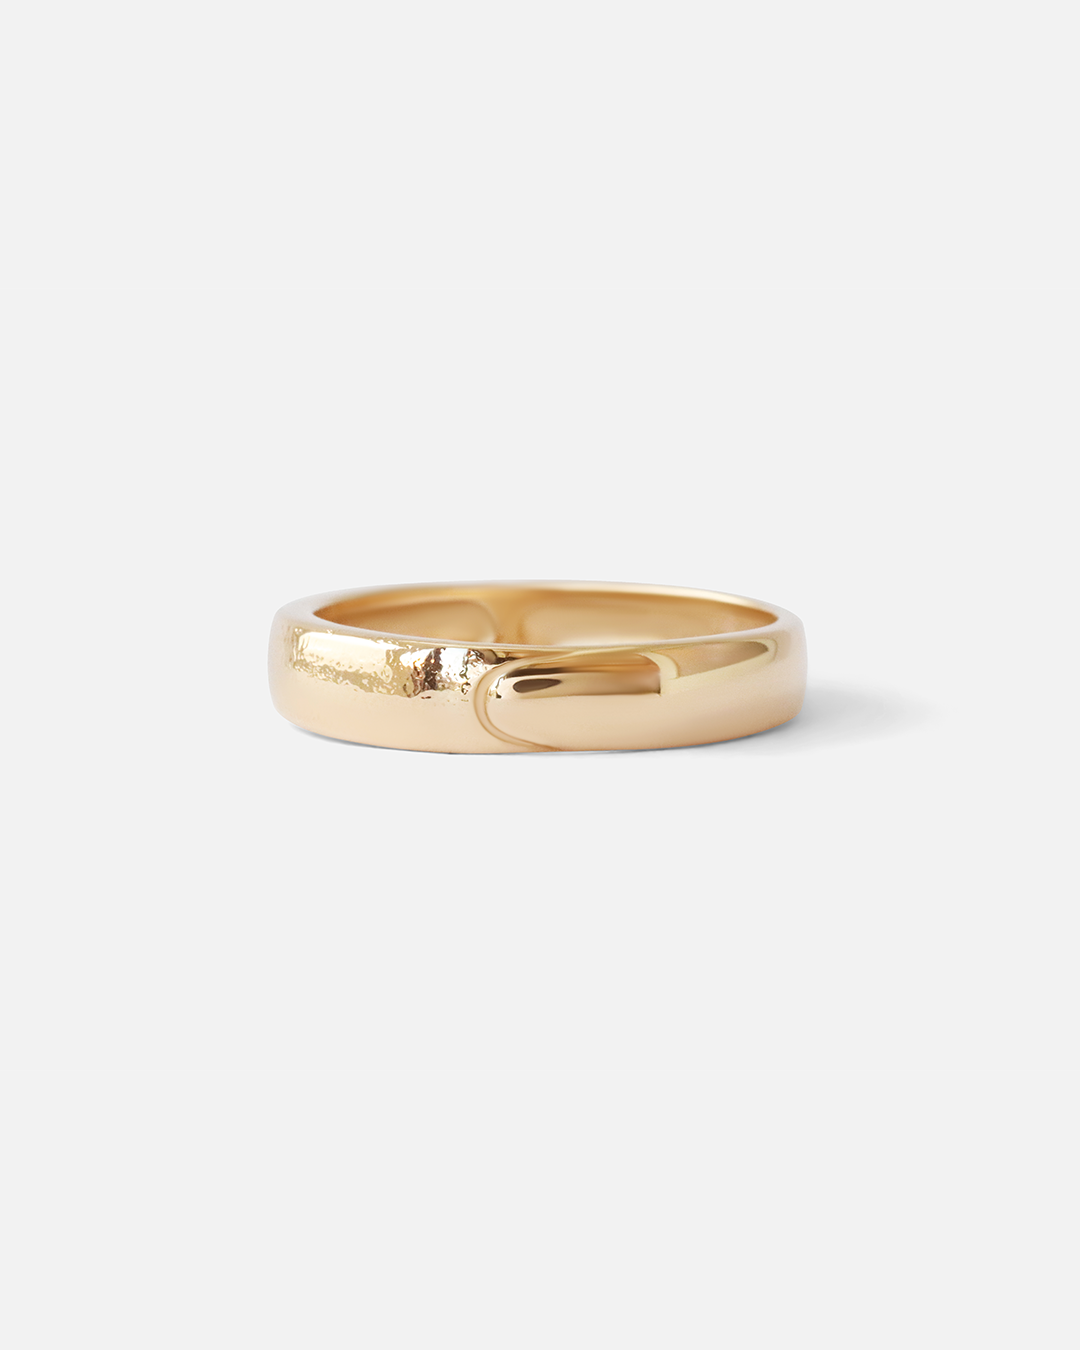 Sparkling Crescent Band By Young Sun Song in Wedding Bands Category